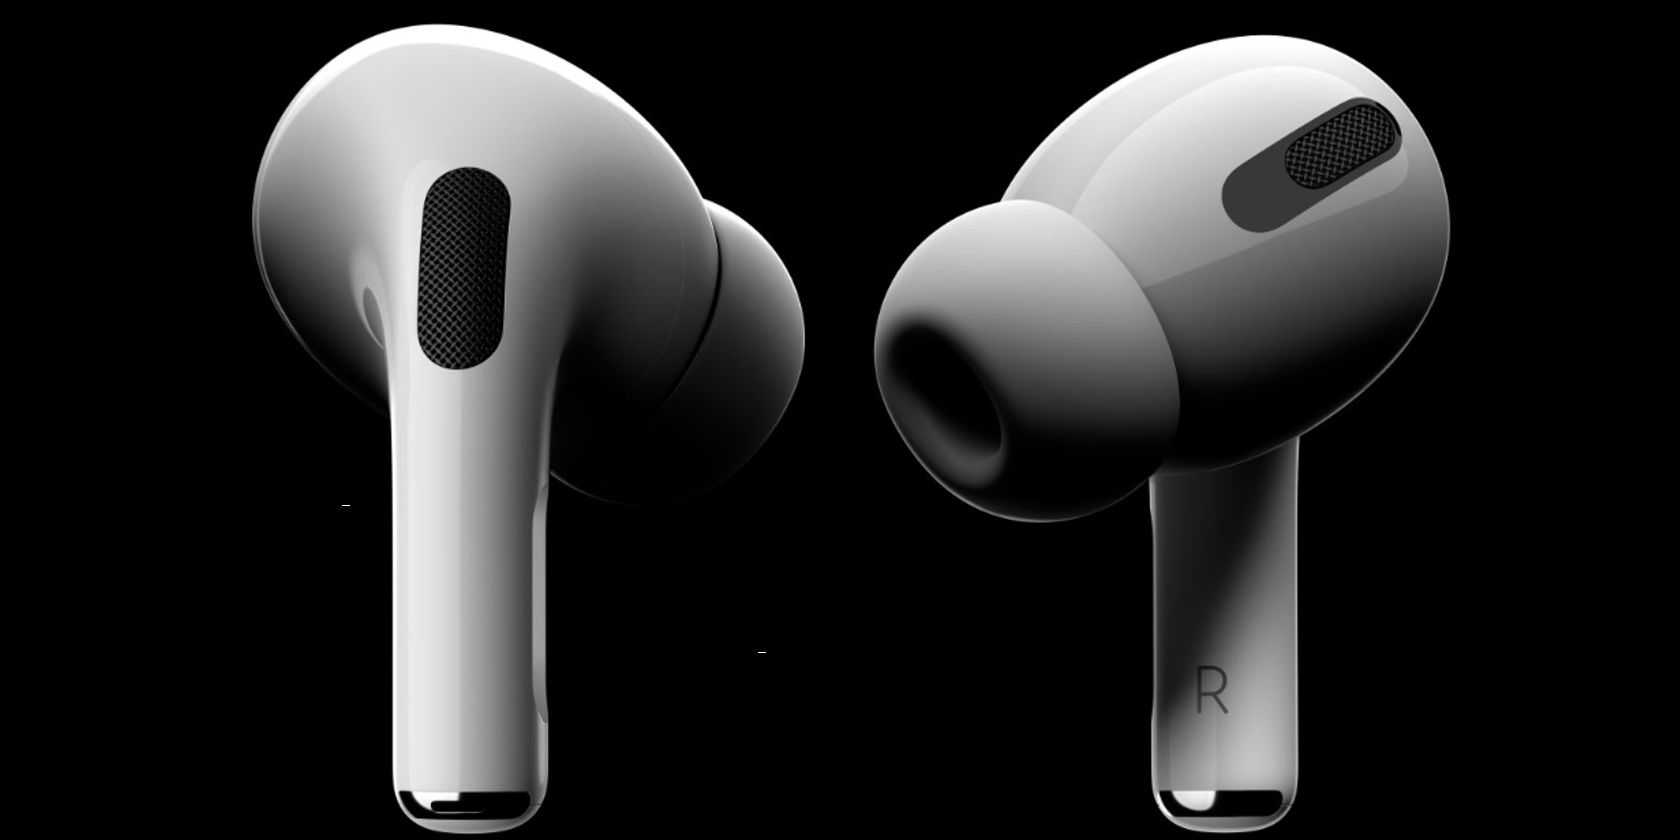 Apple's AirPods Pro has lots of great features